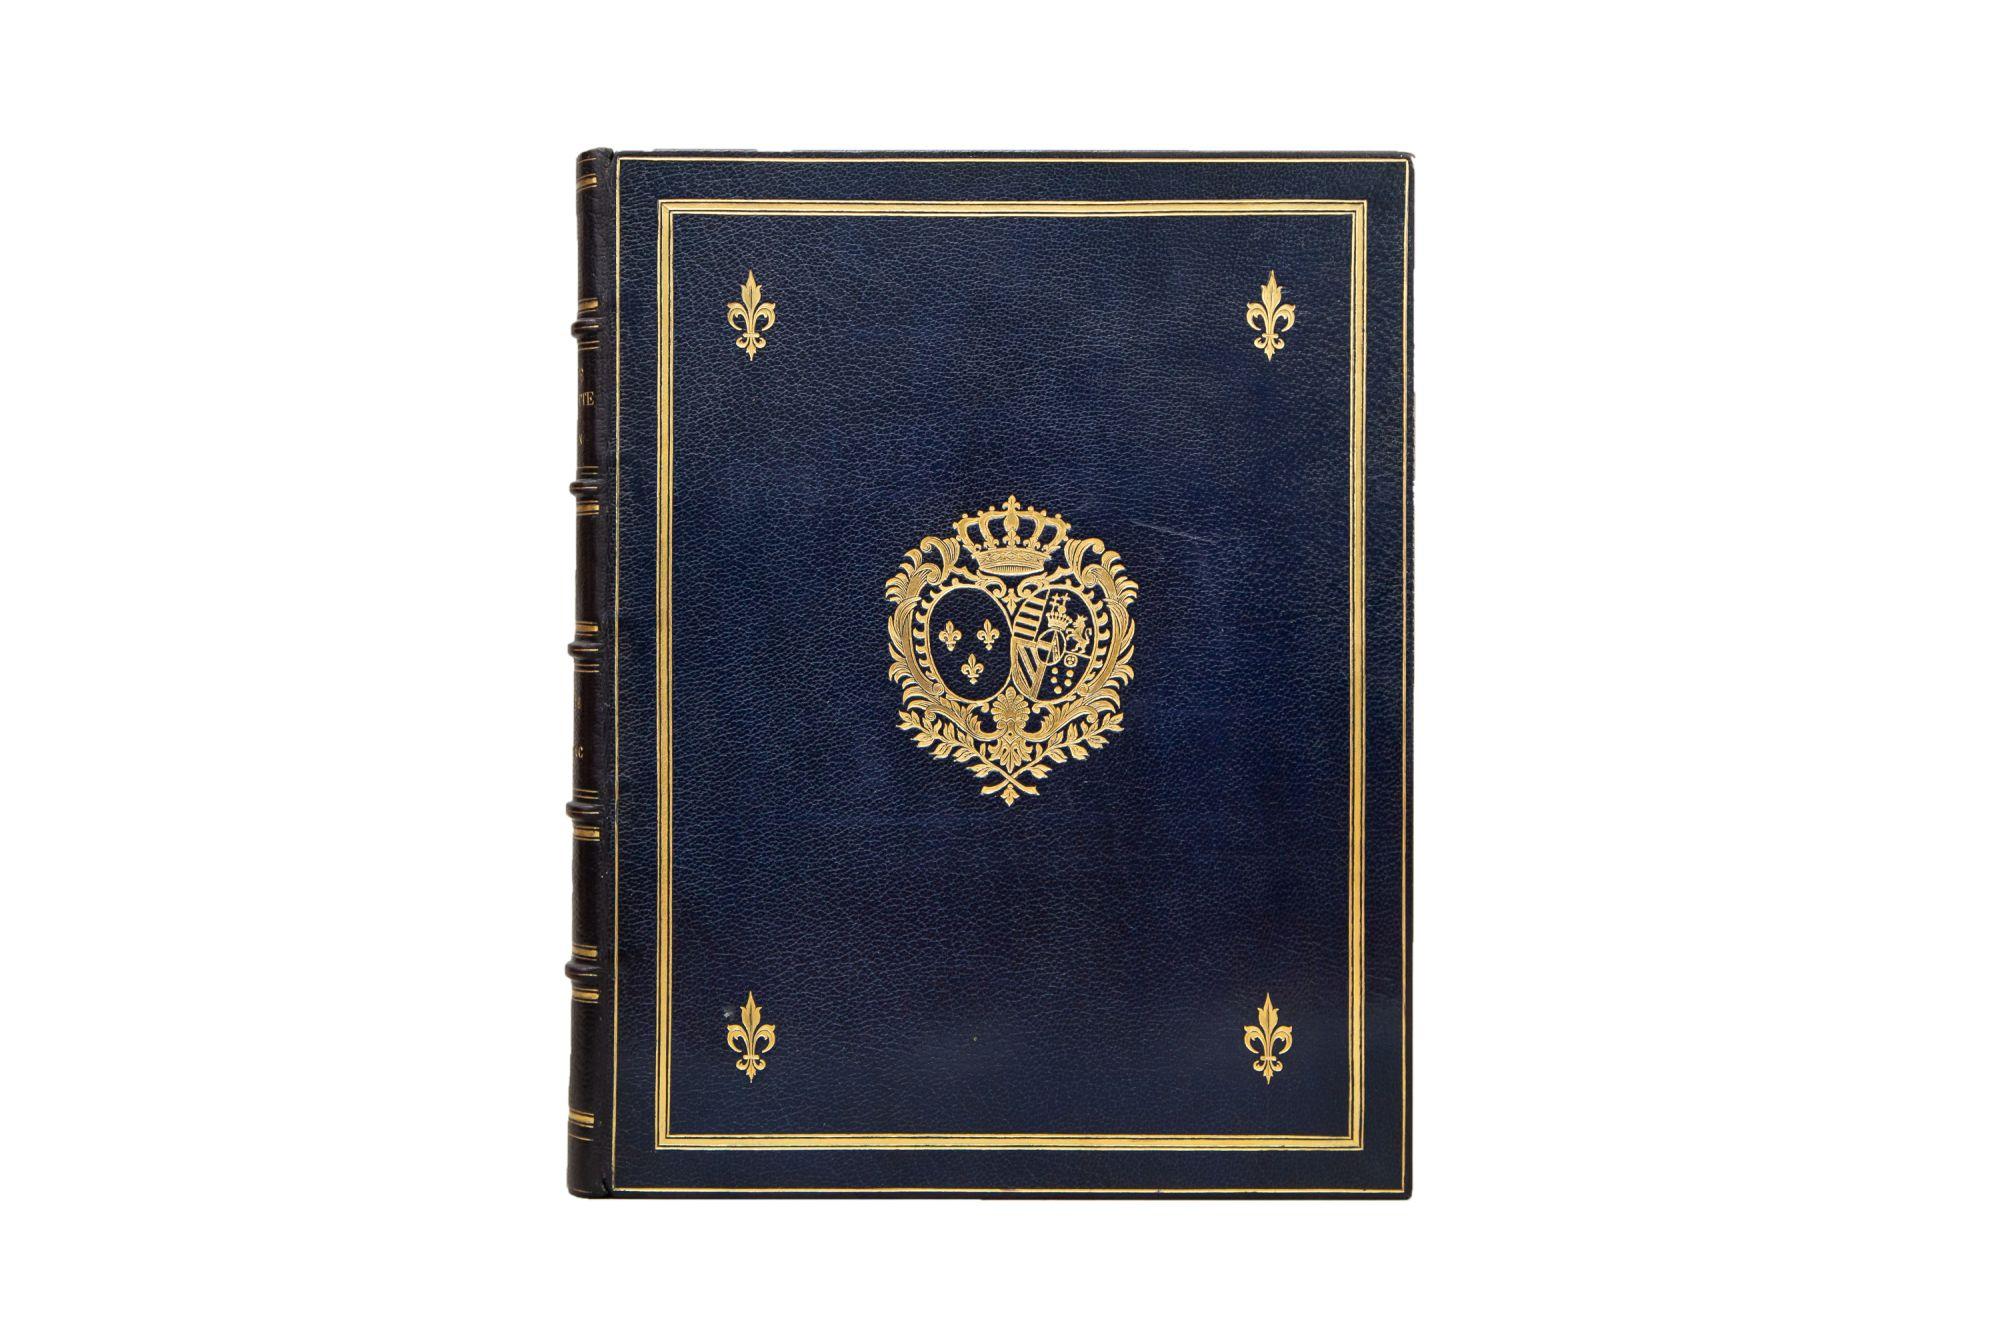 1 Volume. Pierre de Nolhac, Marie Antoinette, The Queen. Bound in full navy morocco with covers displaying a crest, Fleur de Lis details, and borders in gilt. Raised band spine with panels displaying gilt Fleurs de Lis and titles. Top edge gilt with